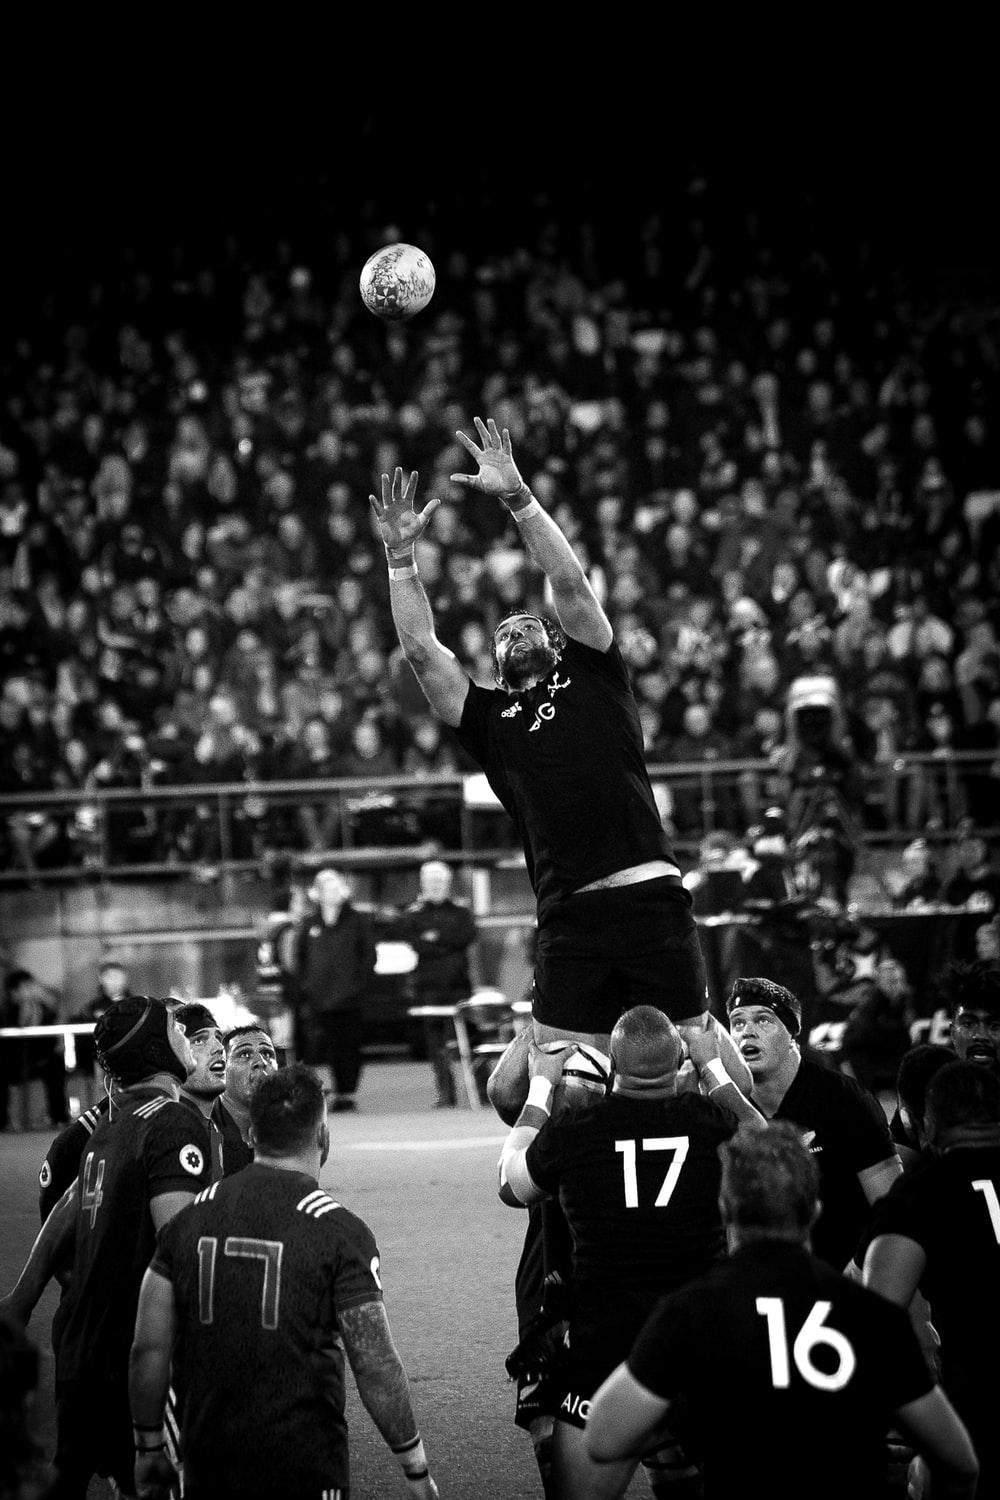 Rugby Picture. Download Free Image